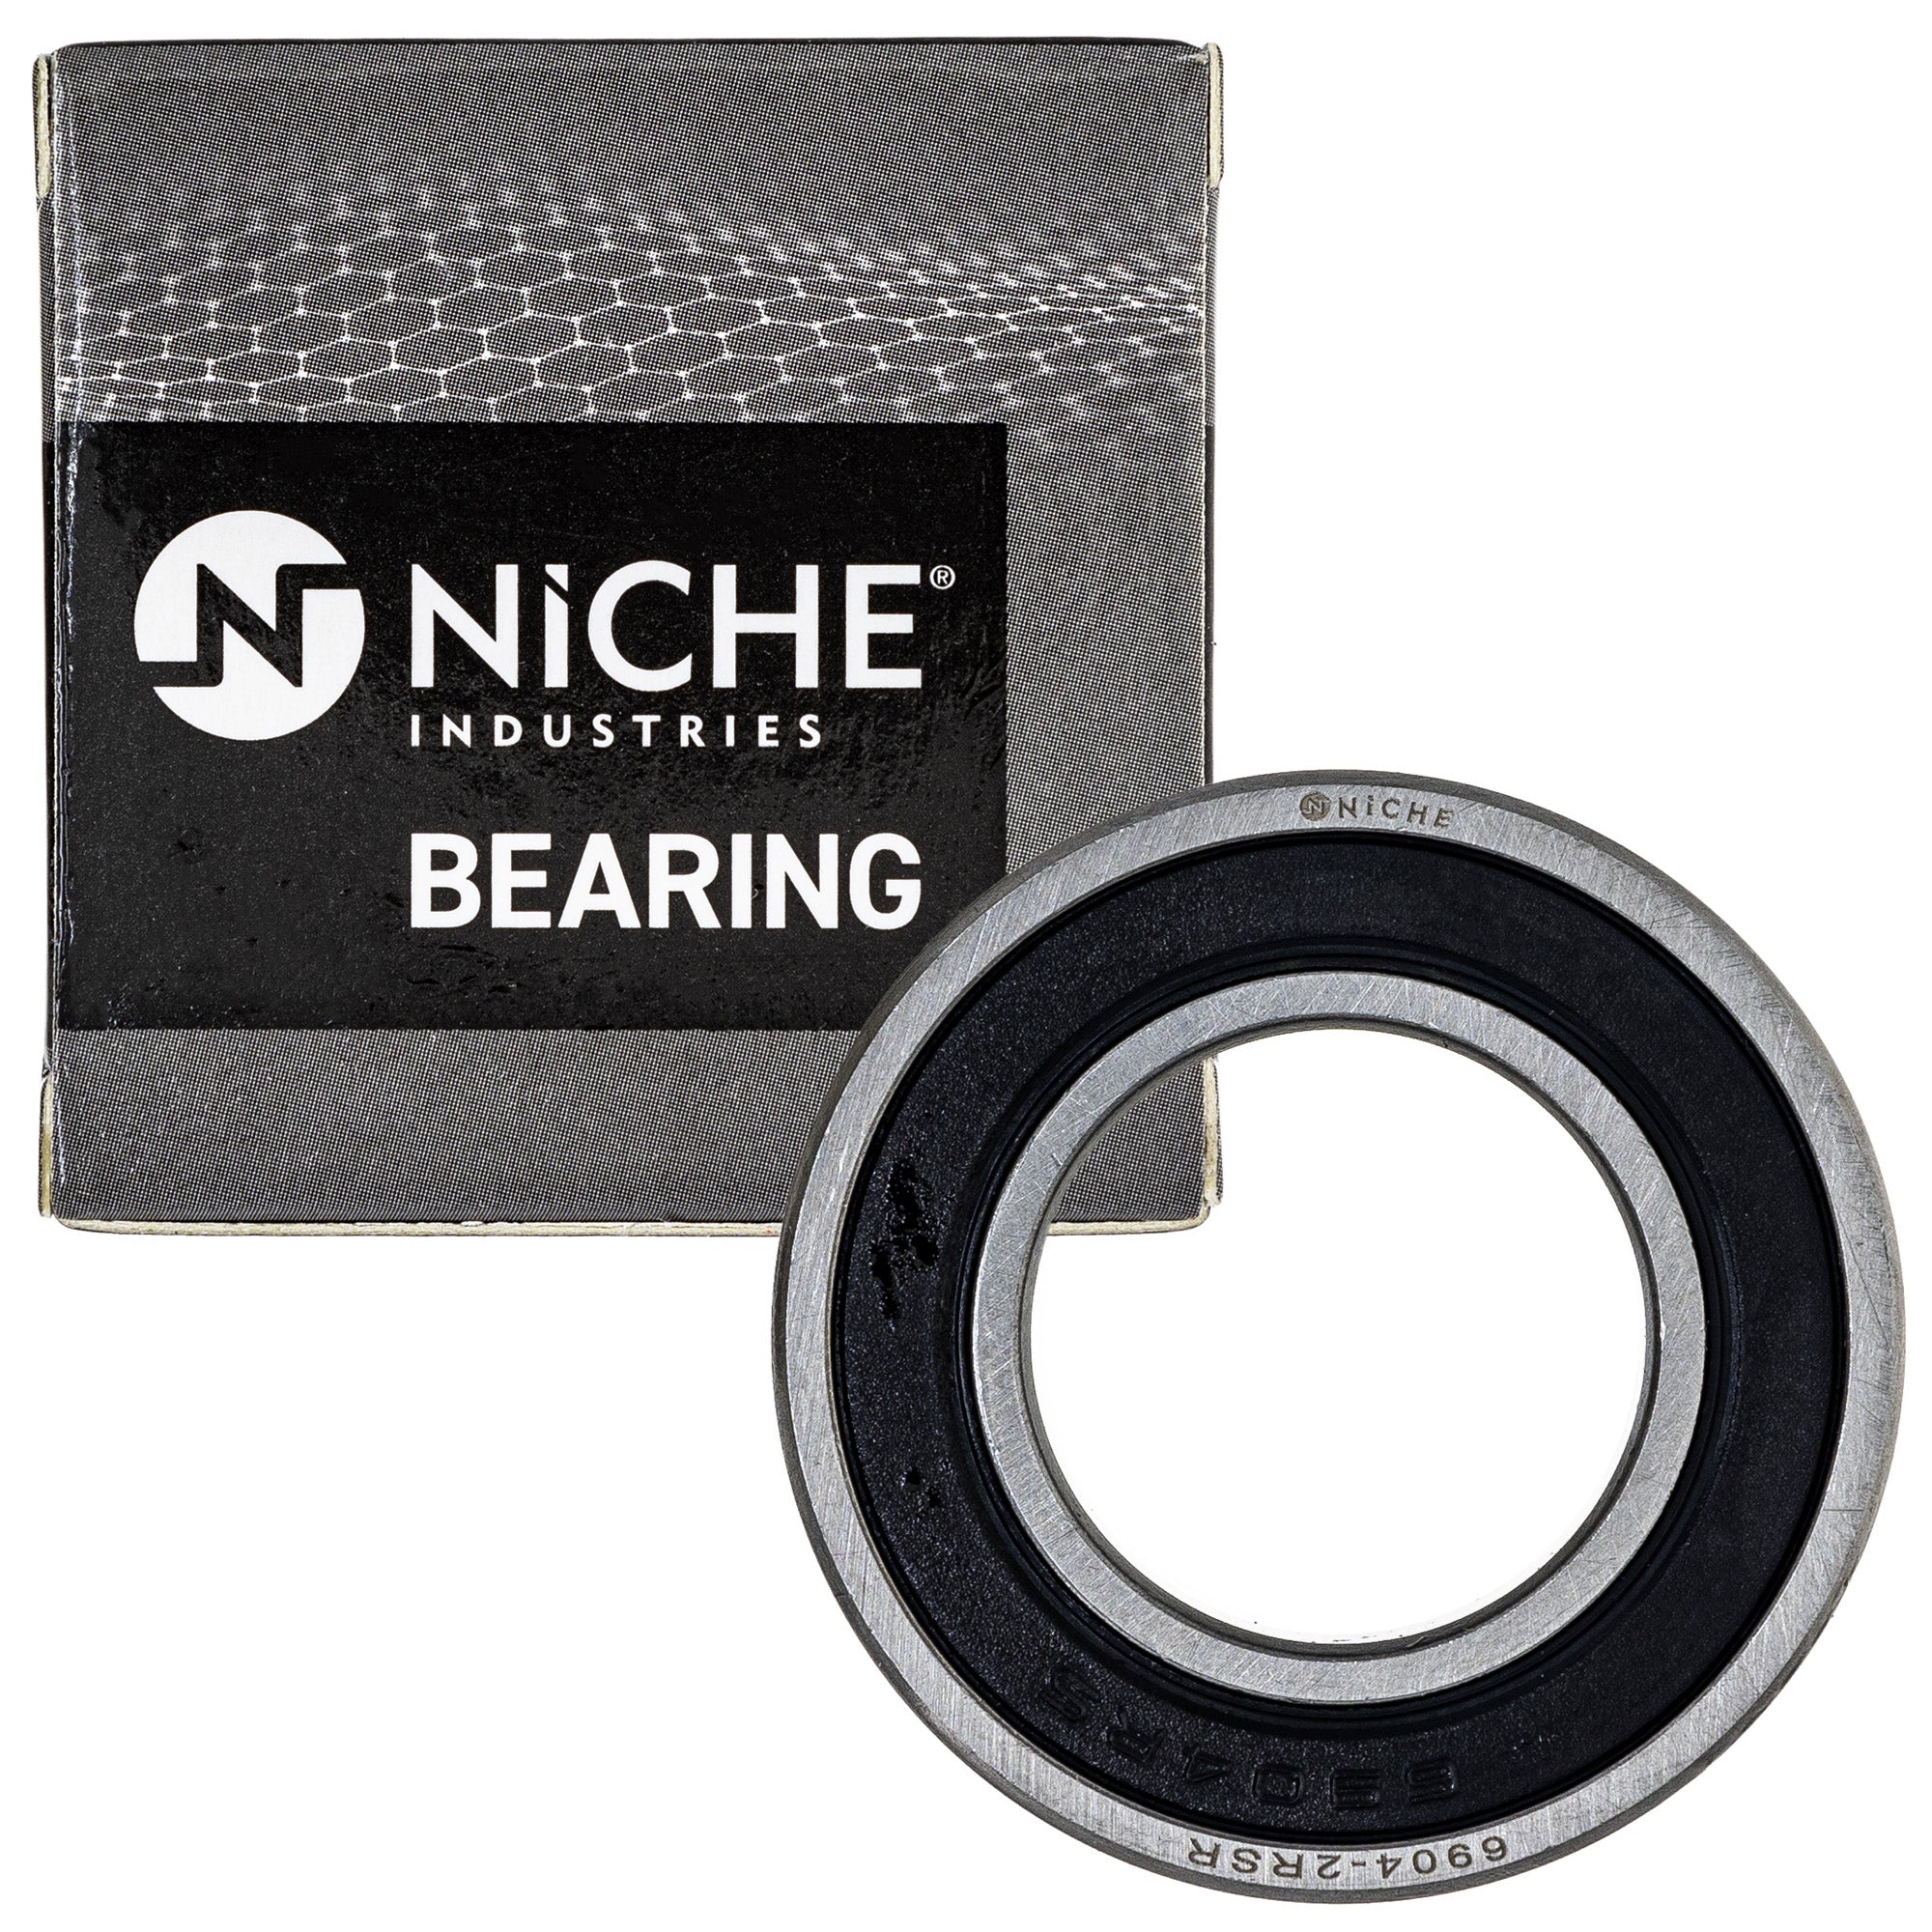 NICHE MK1009101 Wheel Bearing Seal Kit for zOTHER CRF450X CRF450RX